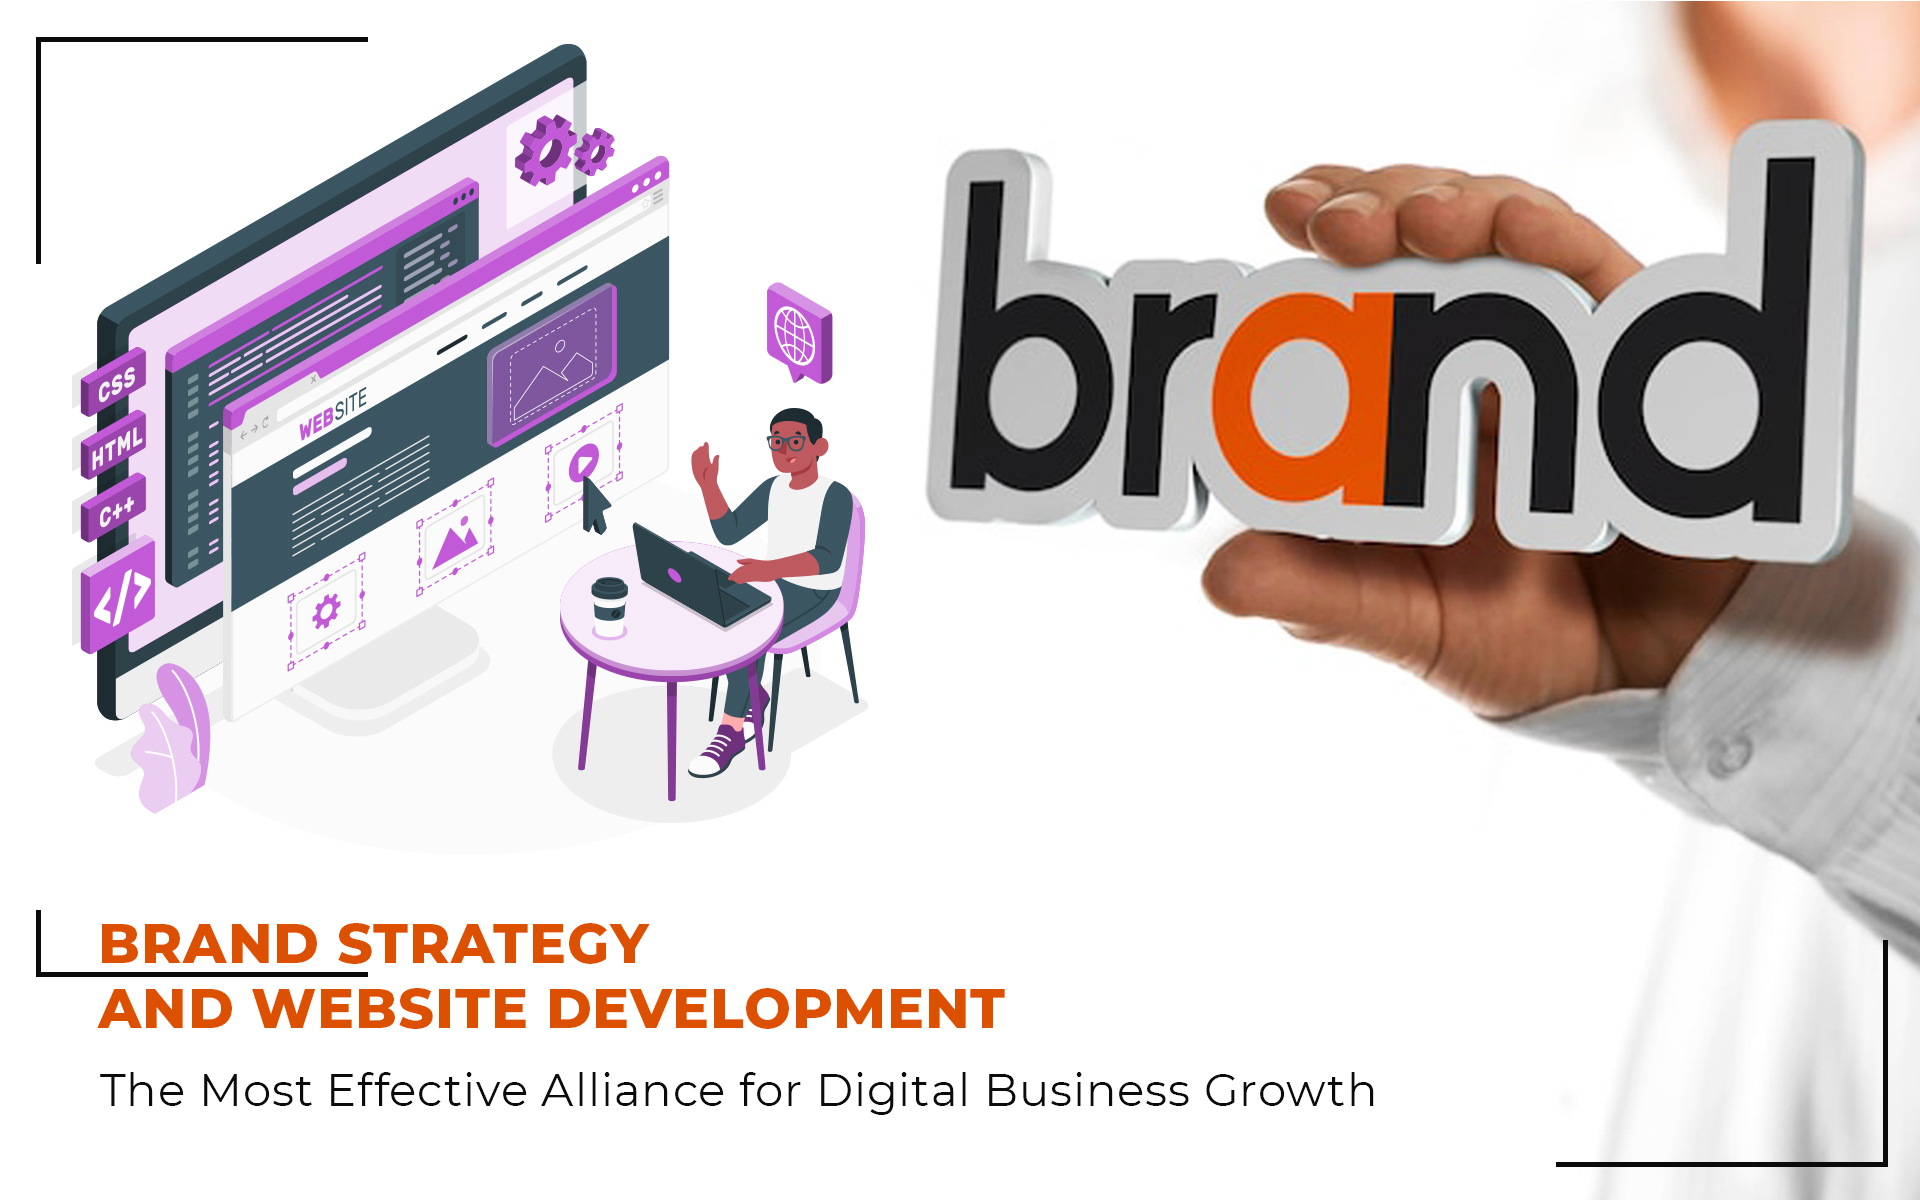 Brand Strategy and Website Development – The Most Effective Alliance for Digital Business Growth